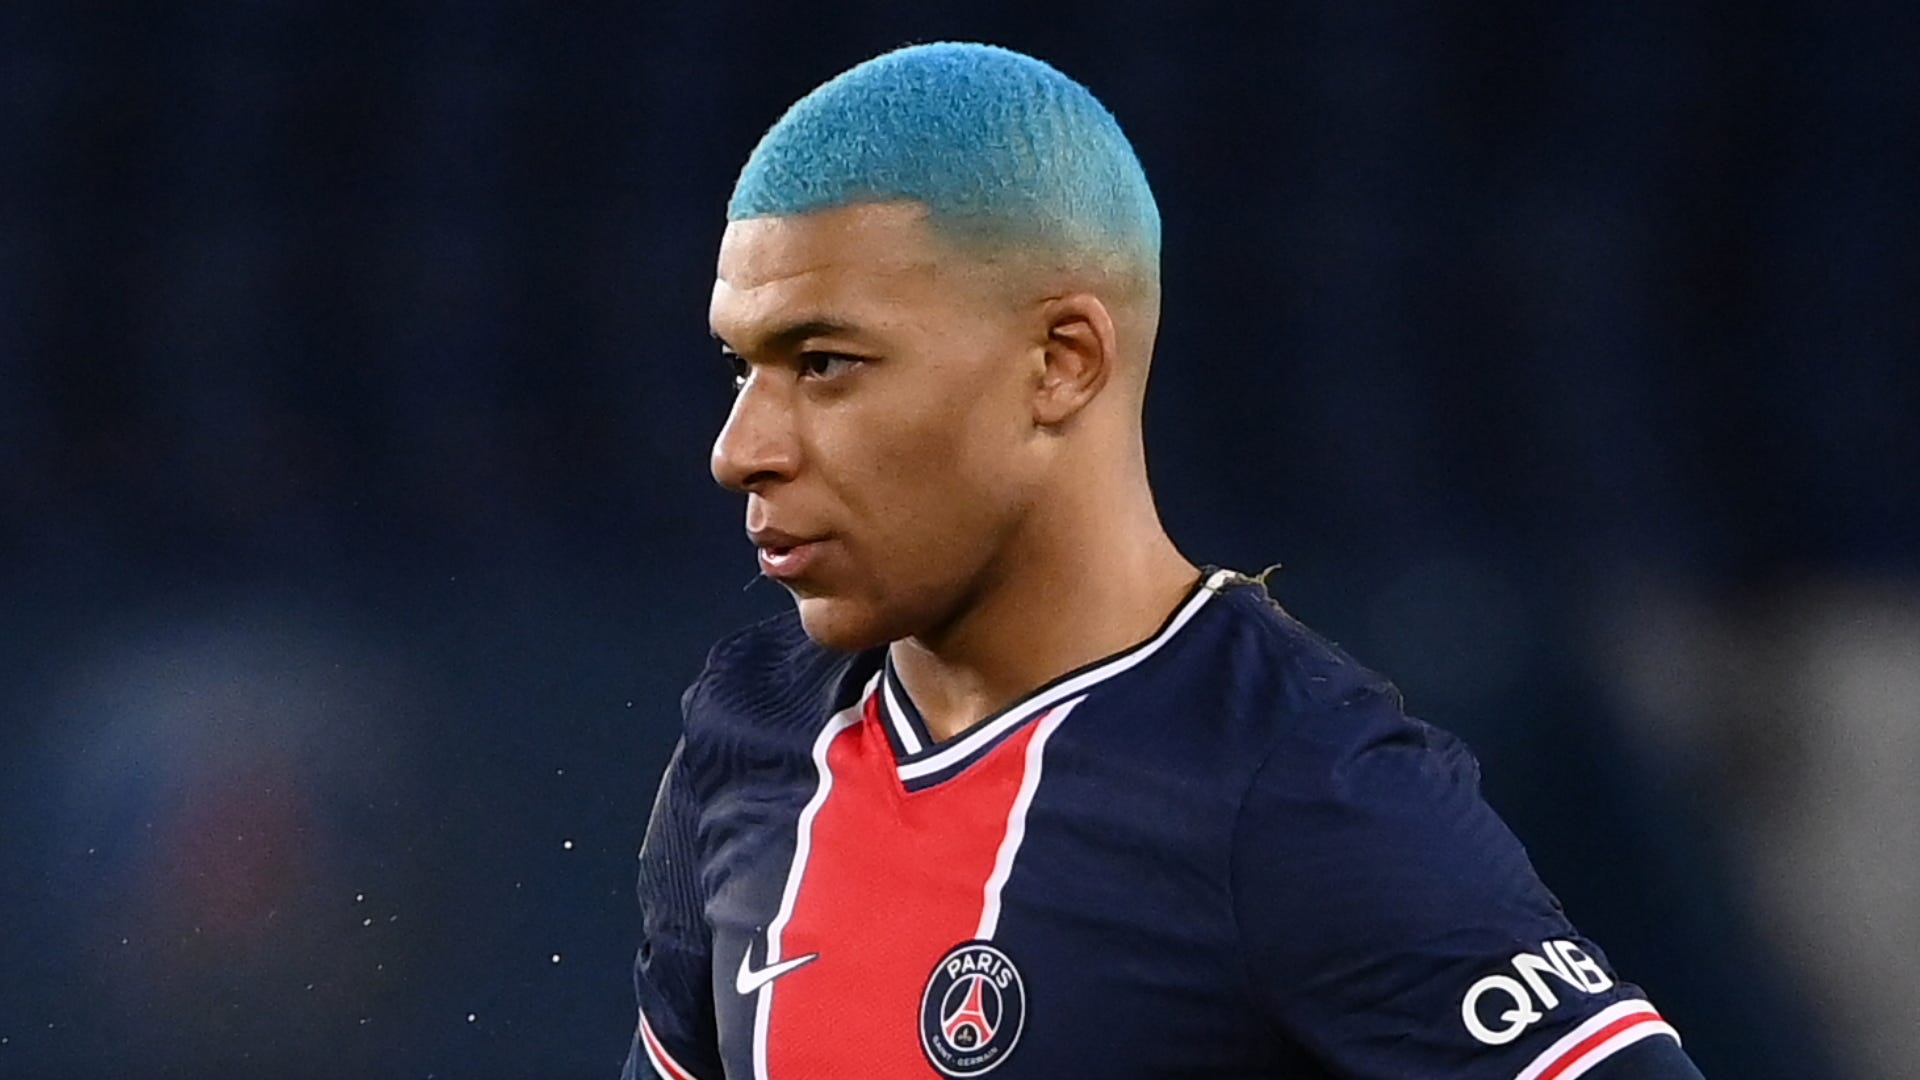 Mbappe has no place at PSG right now